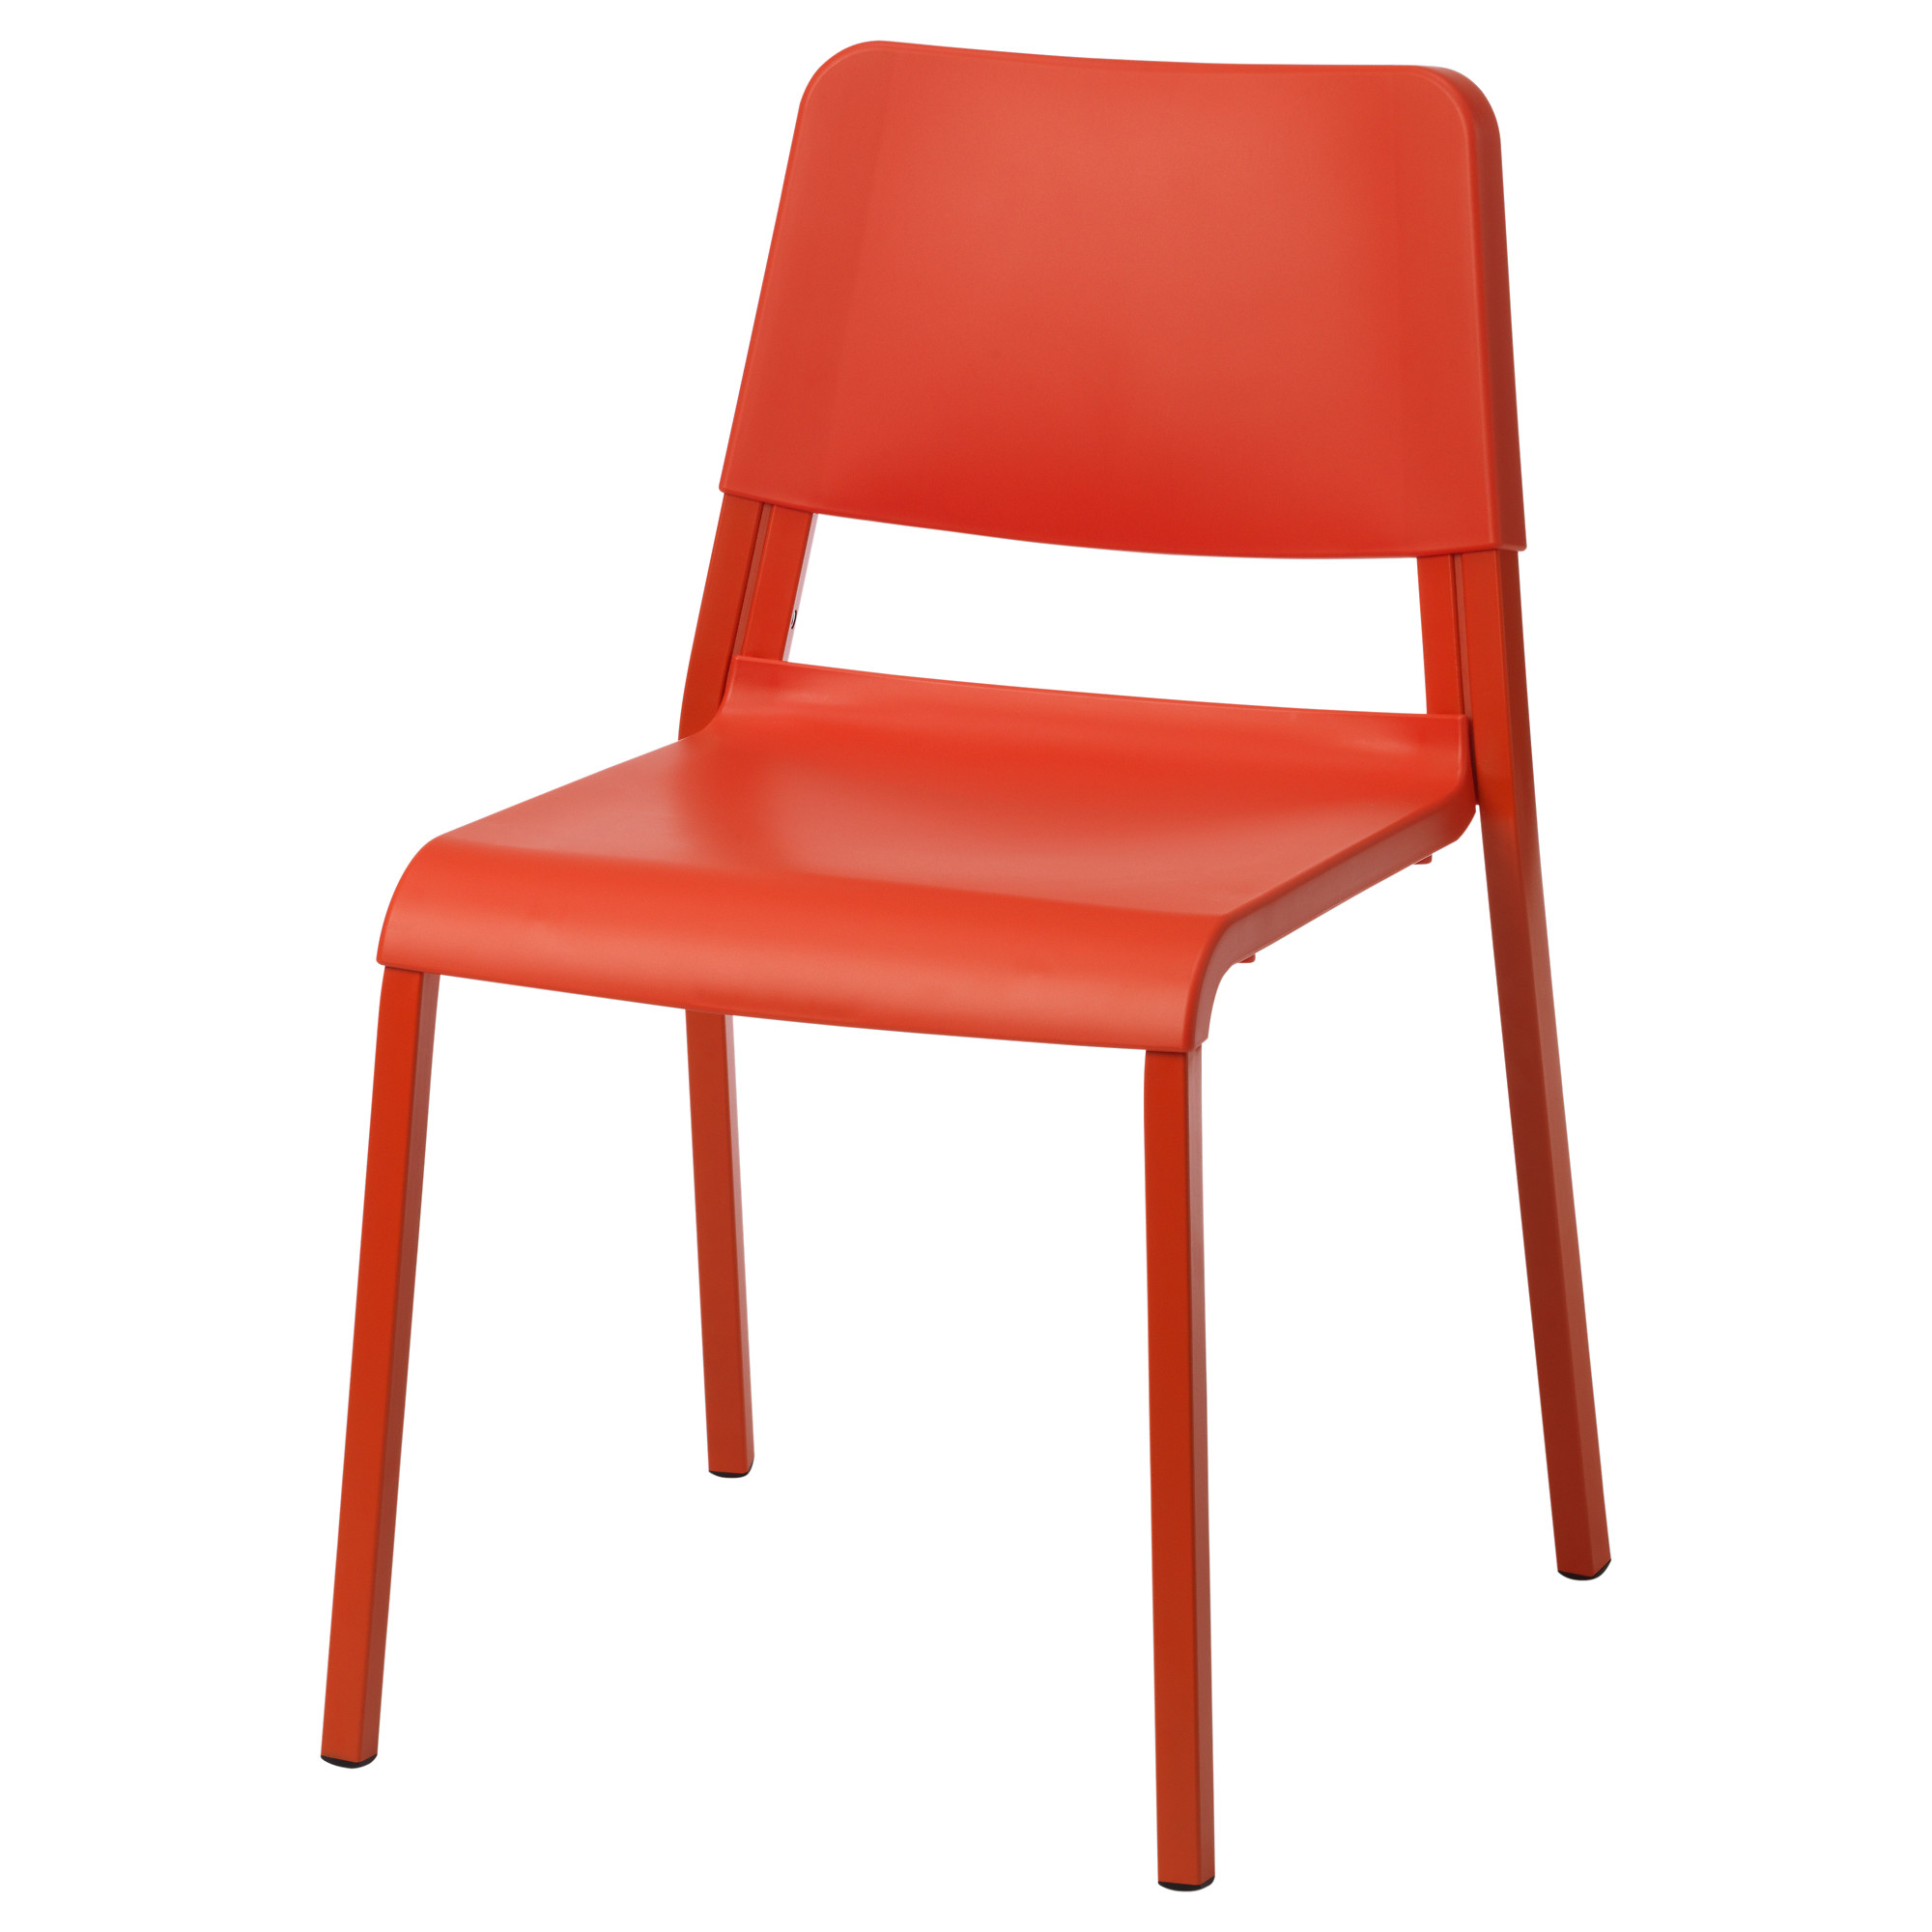 80358024 Teodores Dining Chairs IKEA khmer in phnom penh cambodia